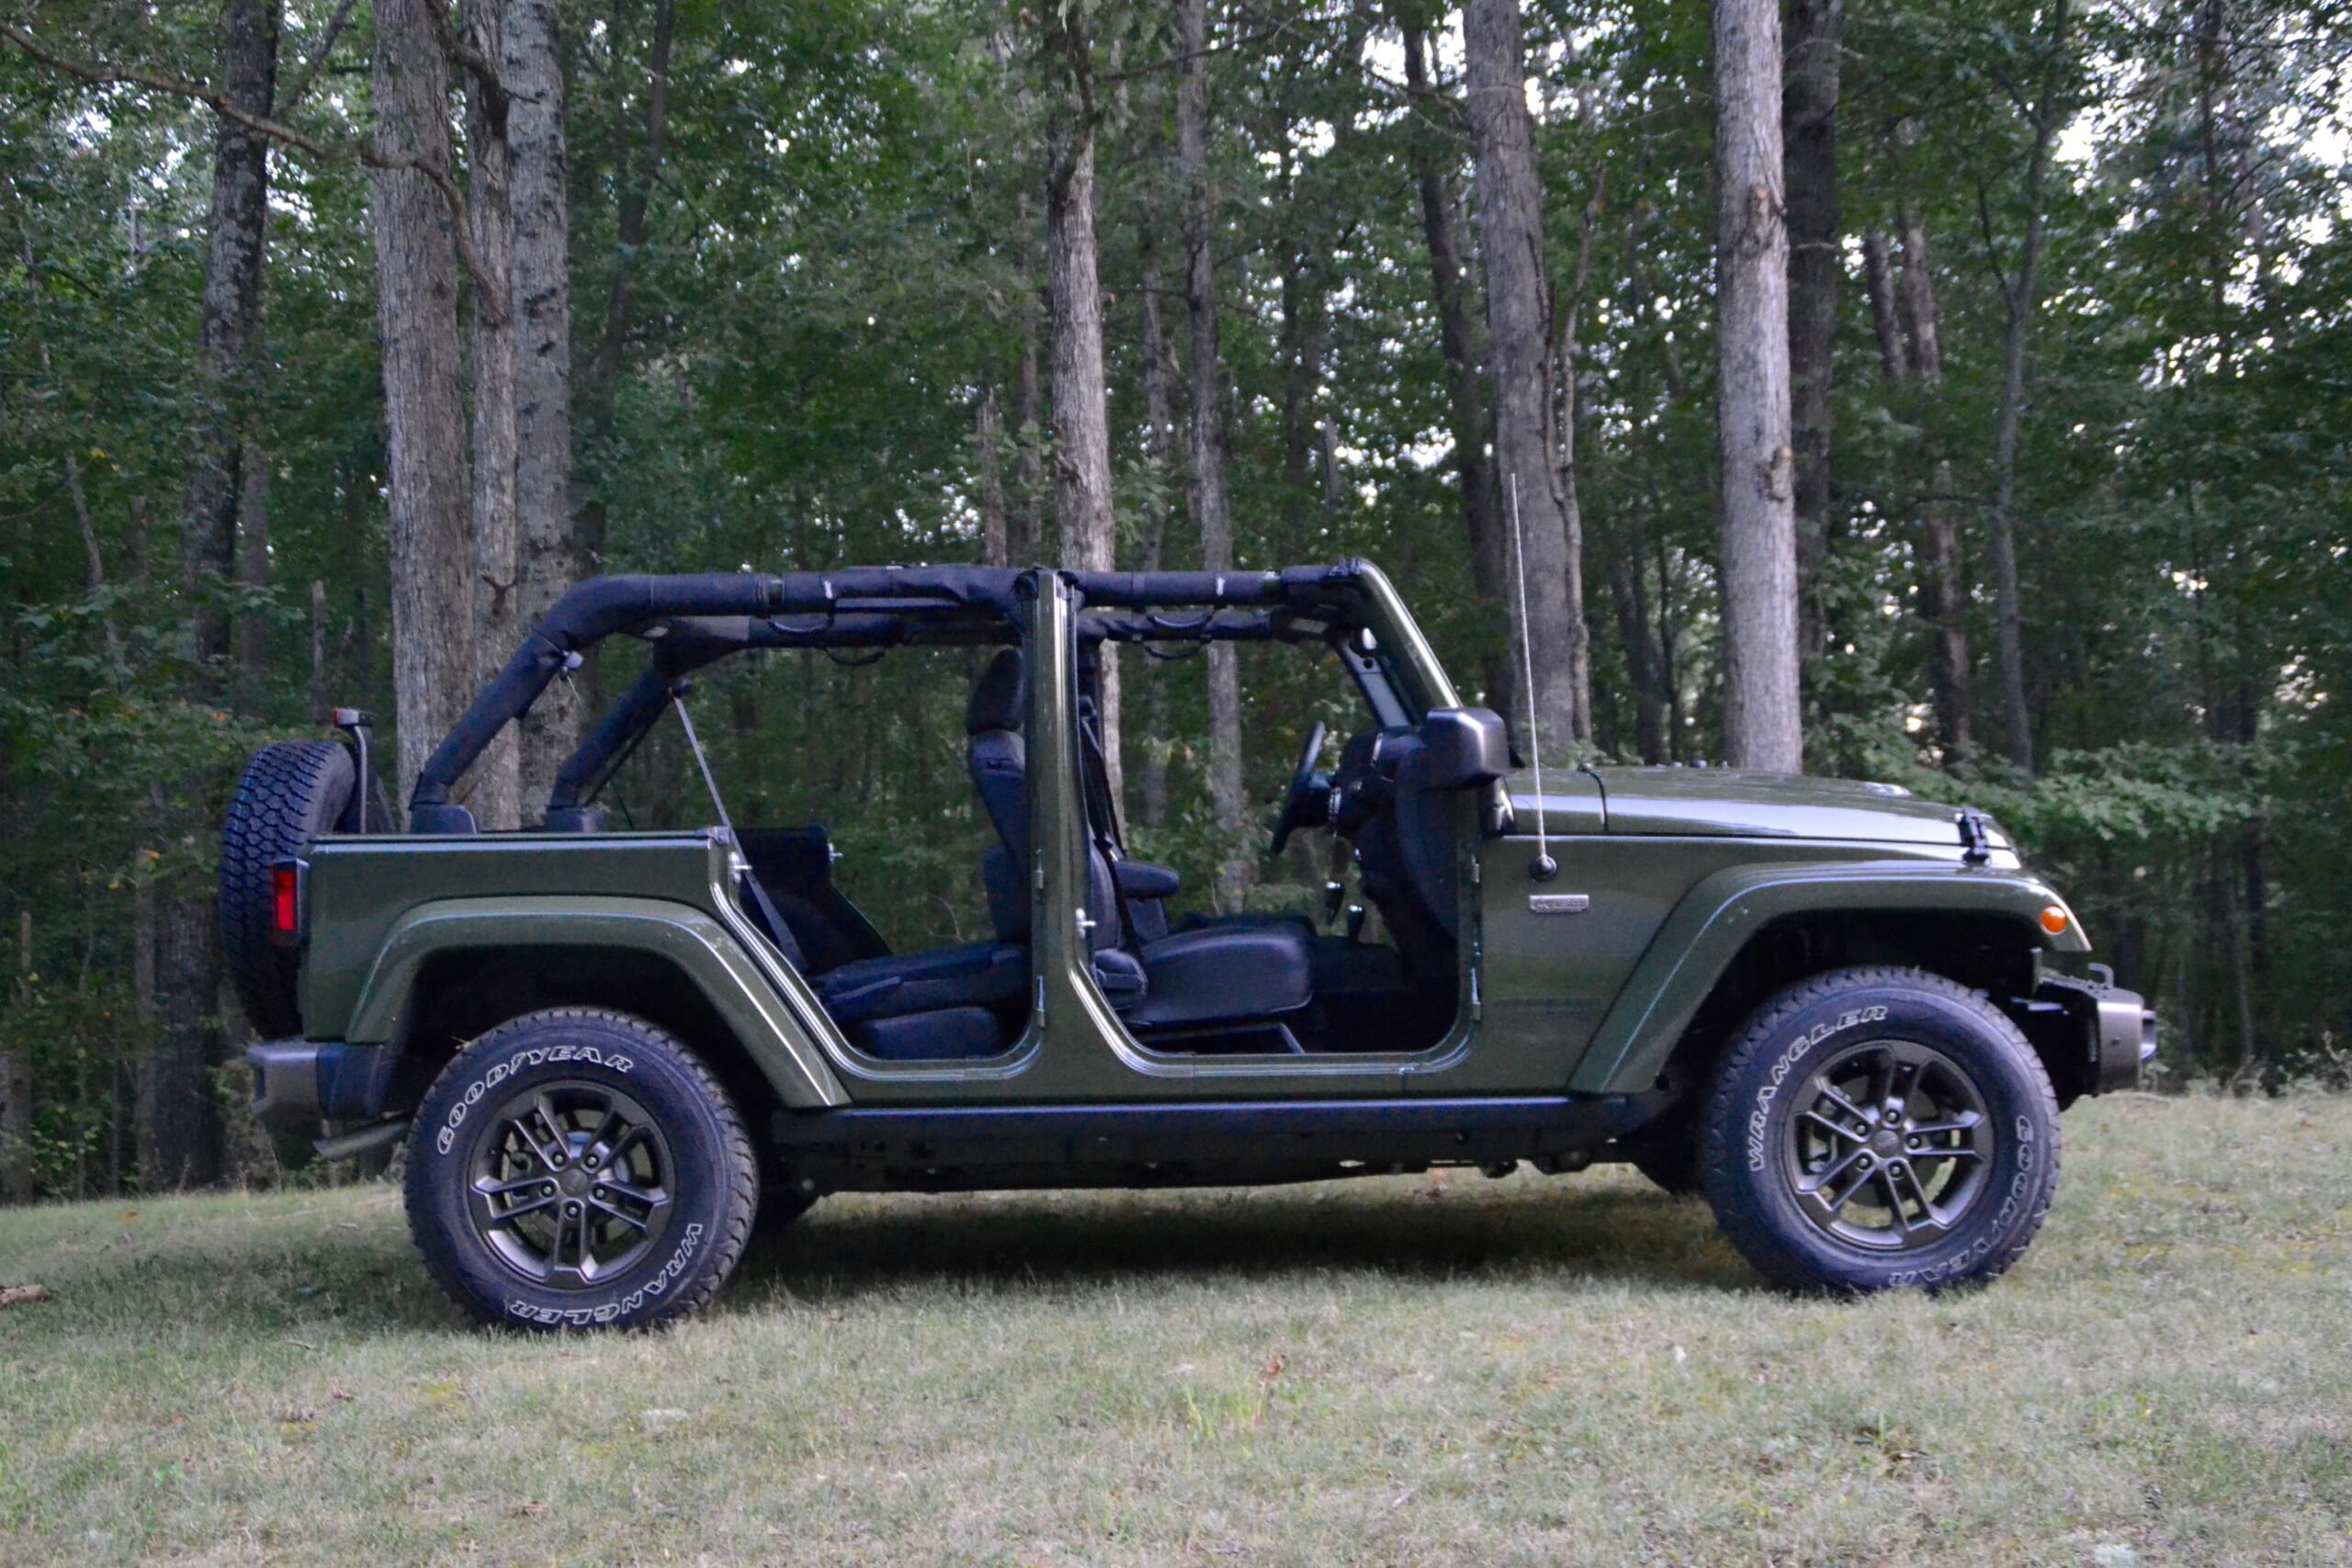 The Awesome Starts When You Peel the Roof and Doors Off Your Jeep - Maxim